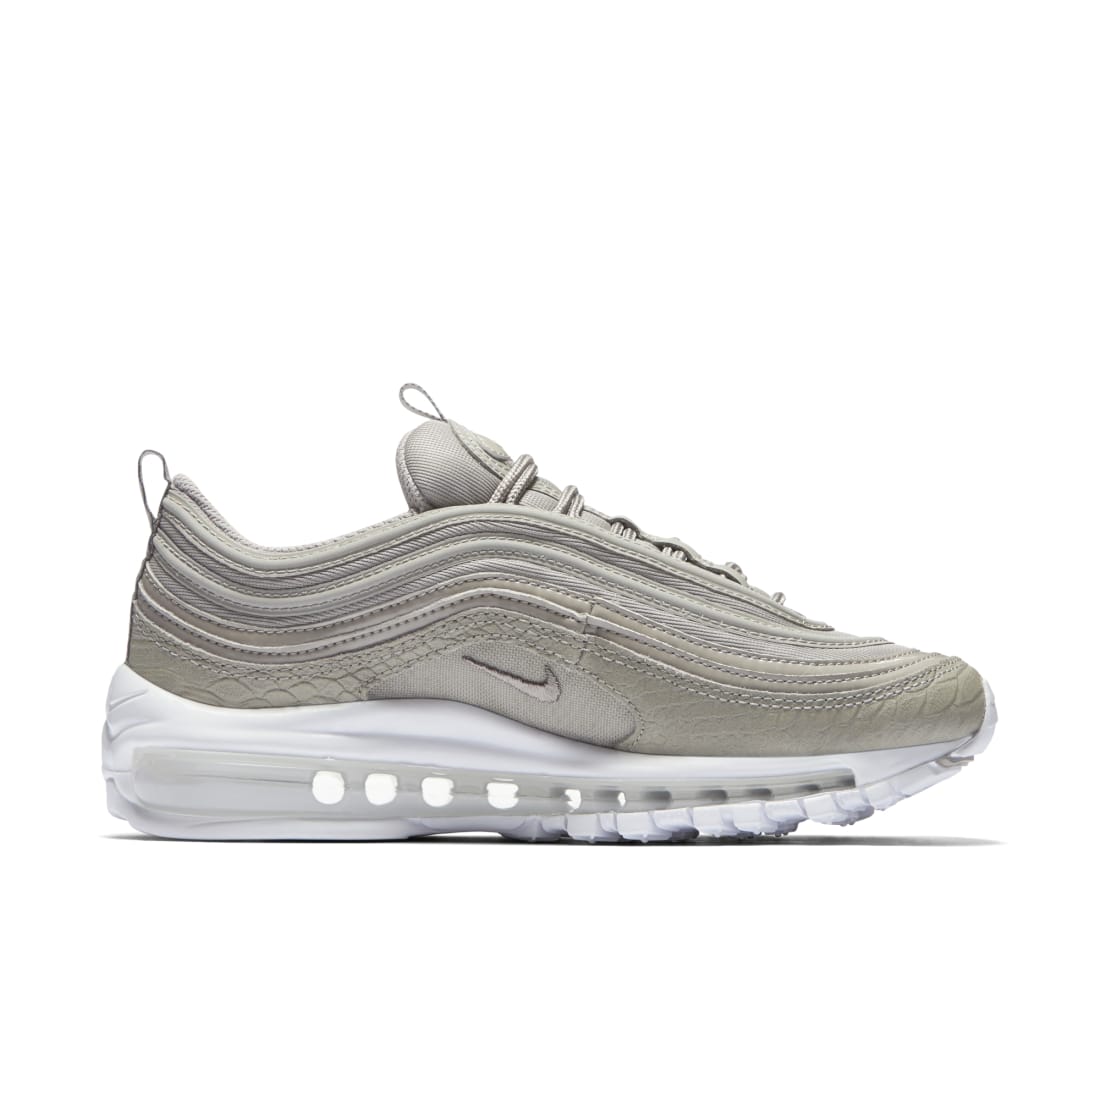 air max 97 white snakeskin release date